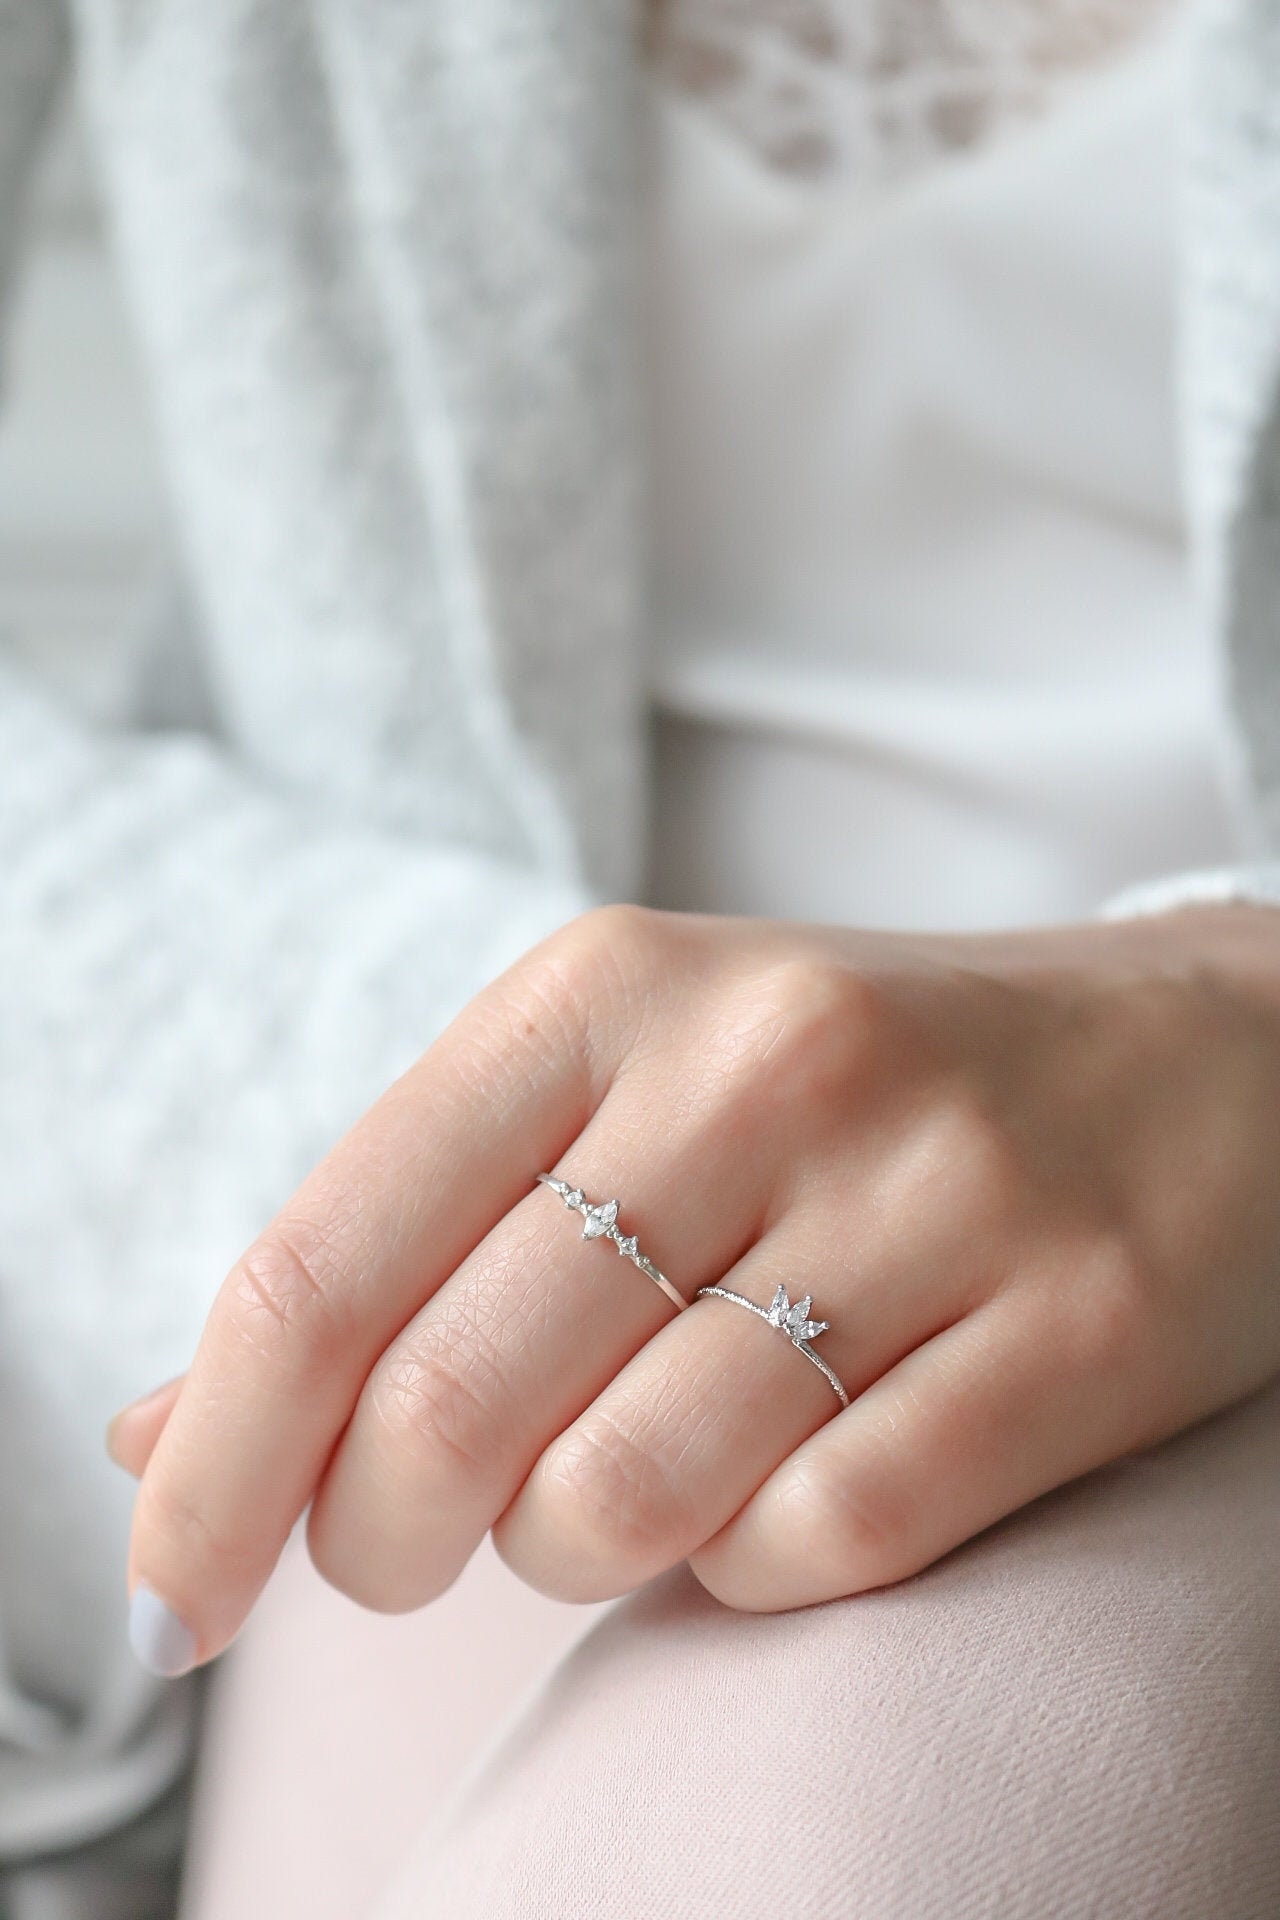 Elna Ring, Leaf Ring, Pretty Marquise Stones, Free Size Ring, Adjustable  Rings, for Her, Gift for Girlfriend Wife Women, Dainty Ring 